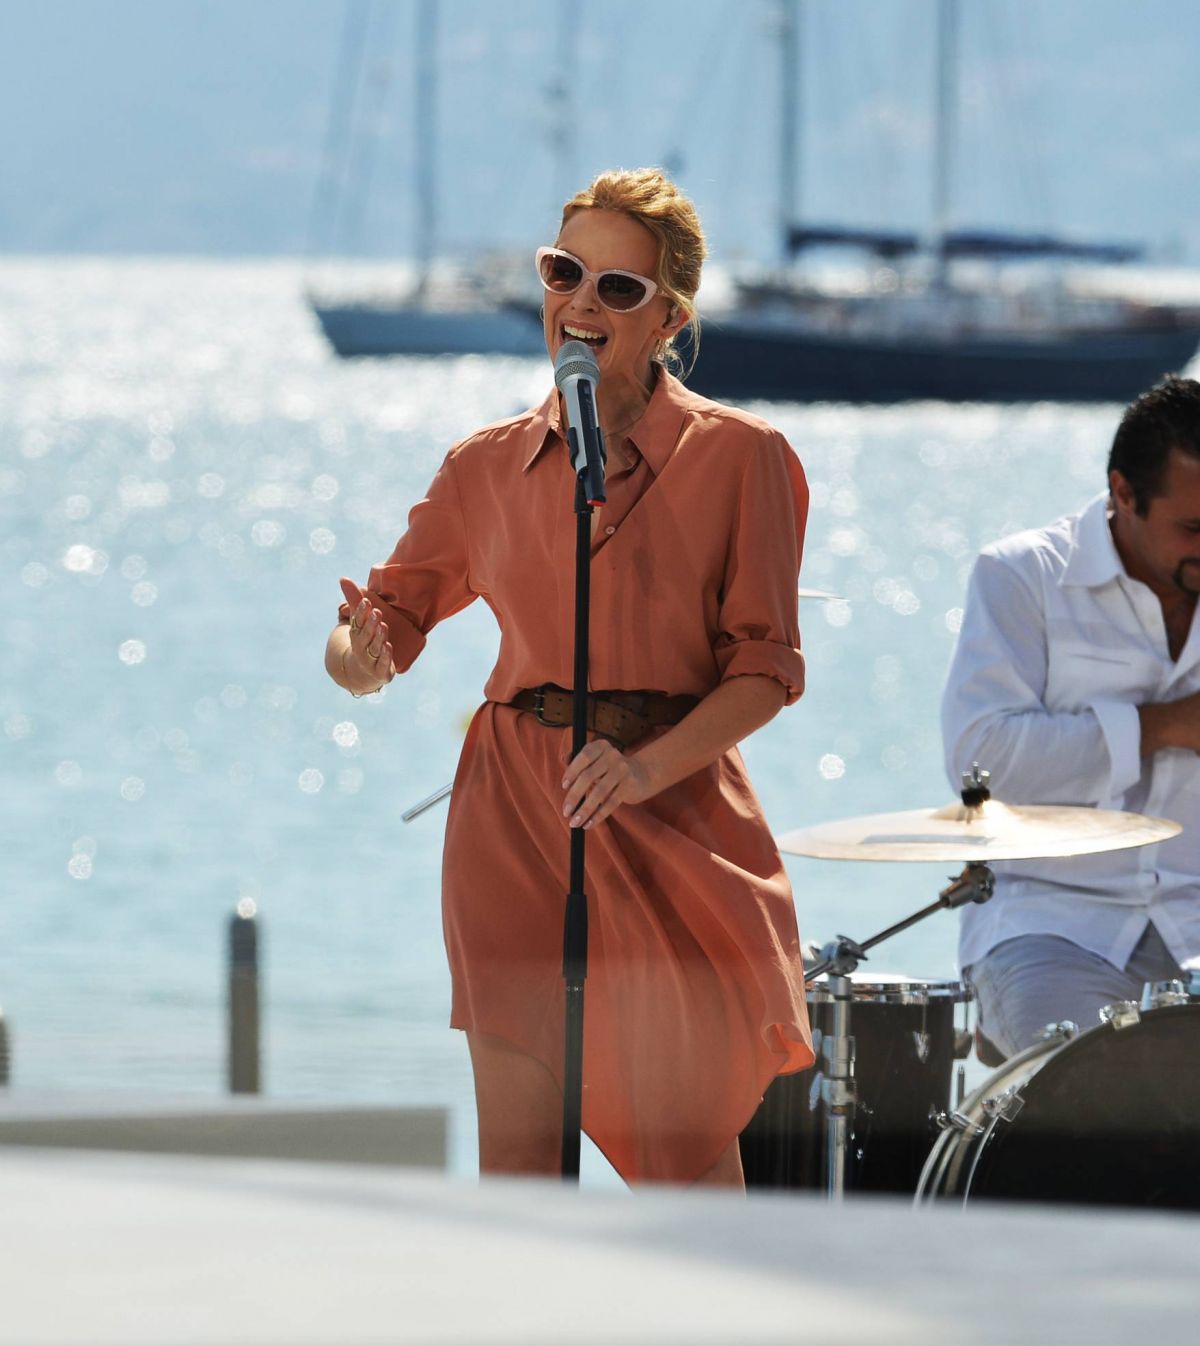 https://www.hawtcelebs.com/wp-content/uploads/2014/05/kylie-minogue-performs-at-stage-of-canal-in-cannes_14.jpg